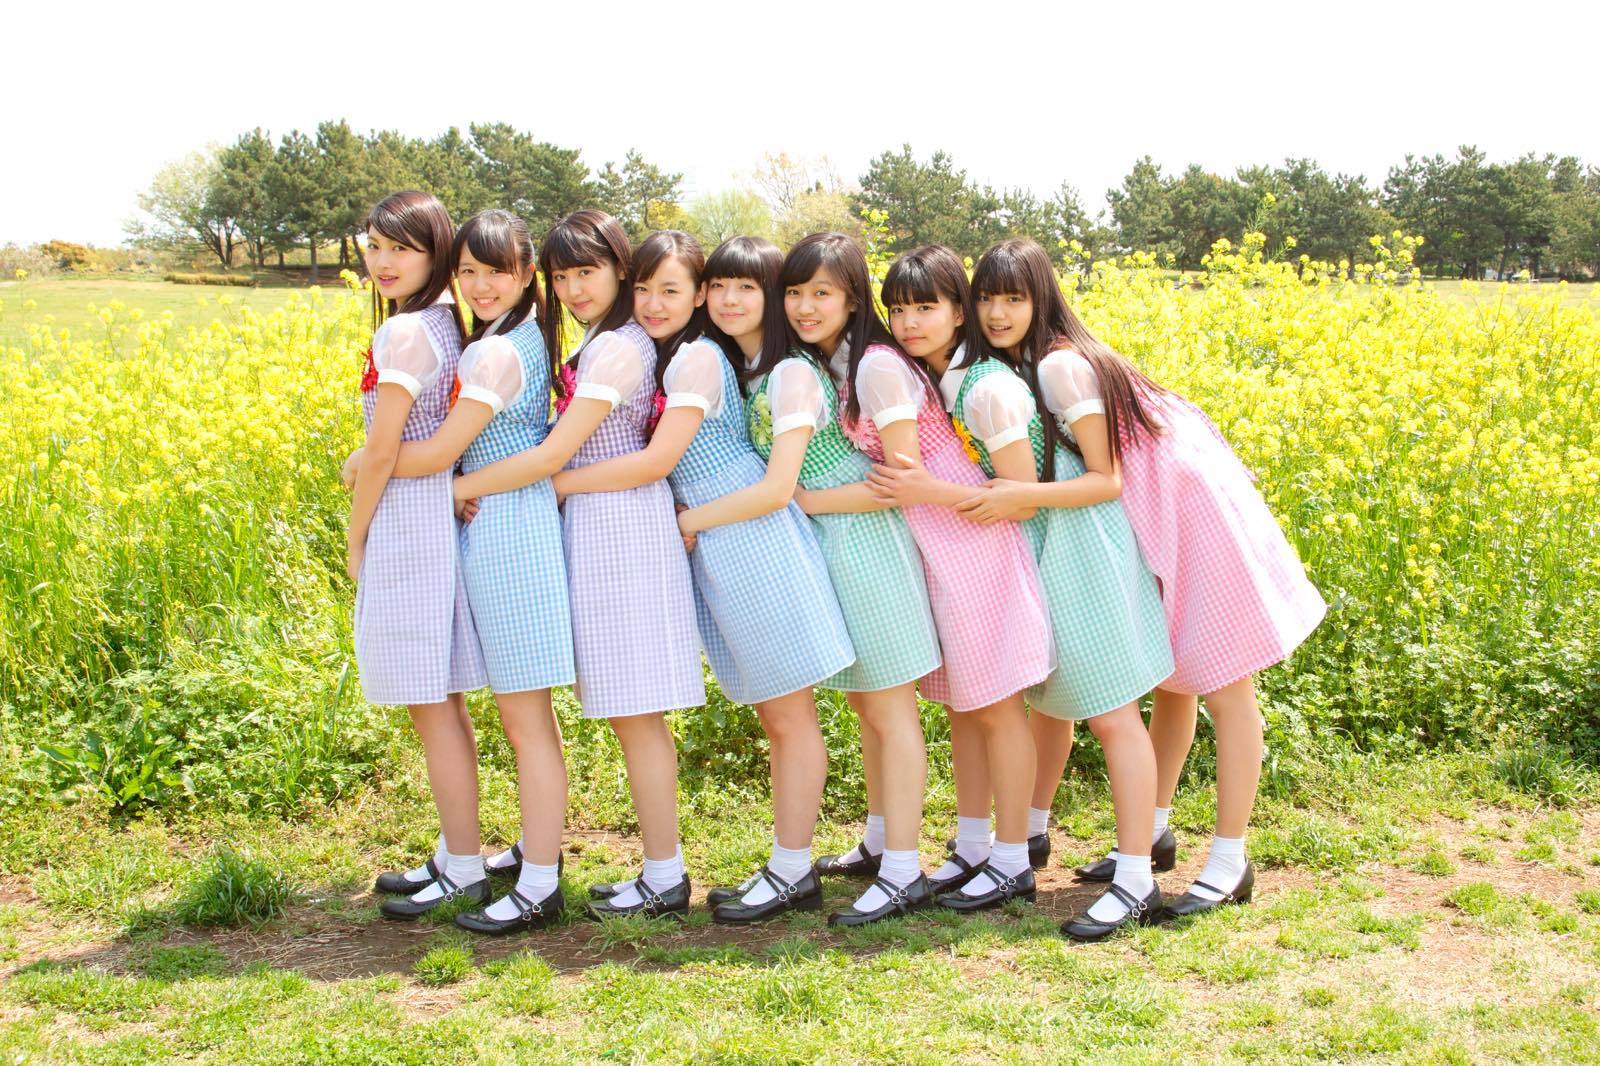 Hakoiri♡Musume Tell a Tale of Young Love in the MV for “Hohoemi to Haru to One Piece”!